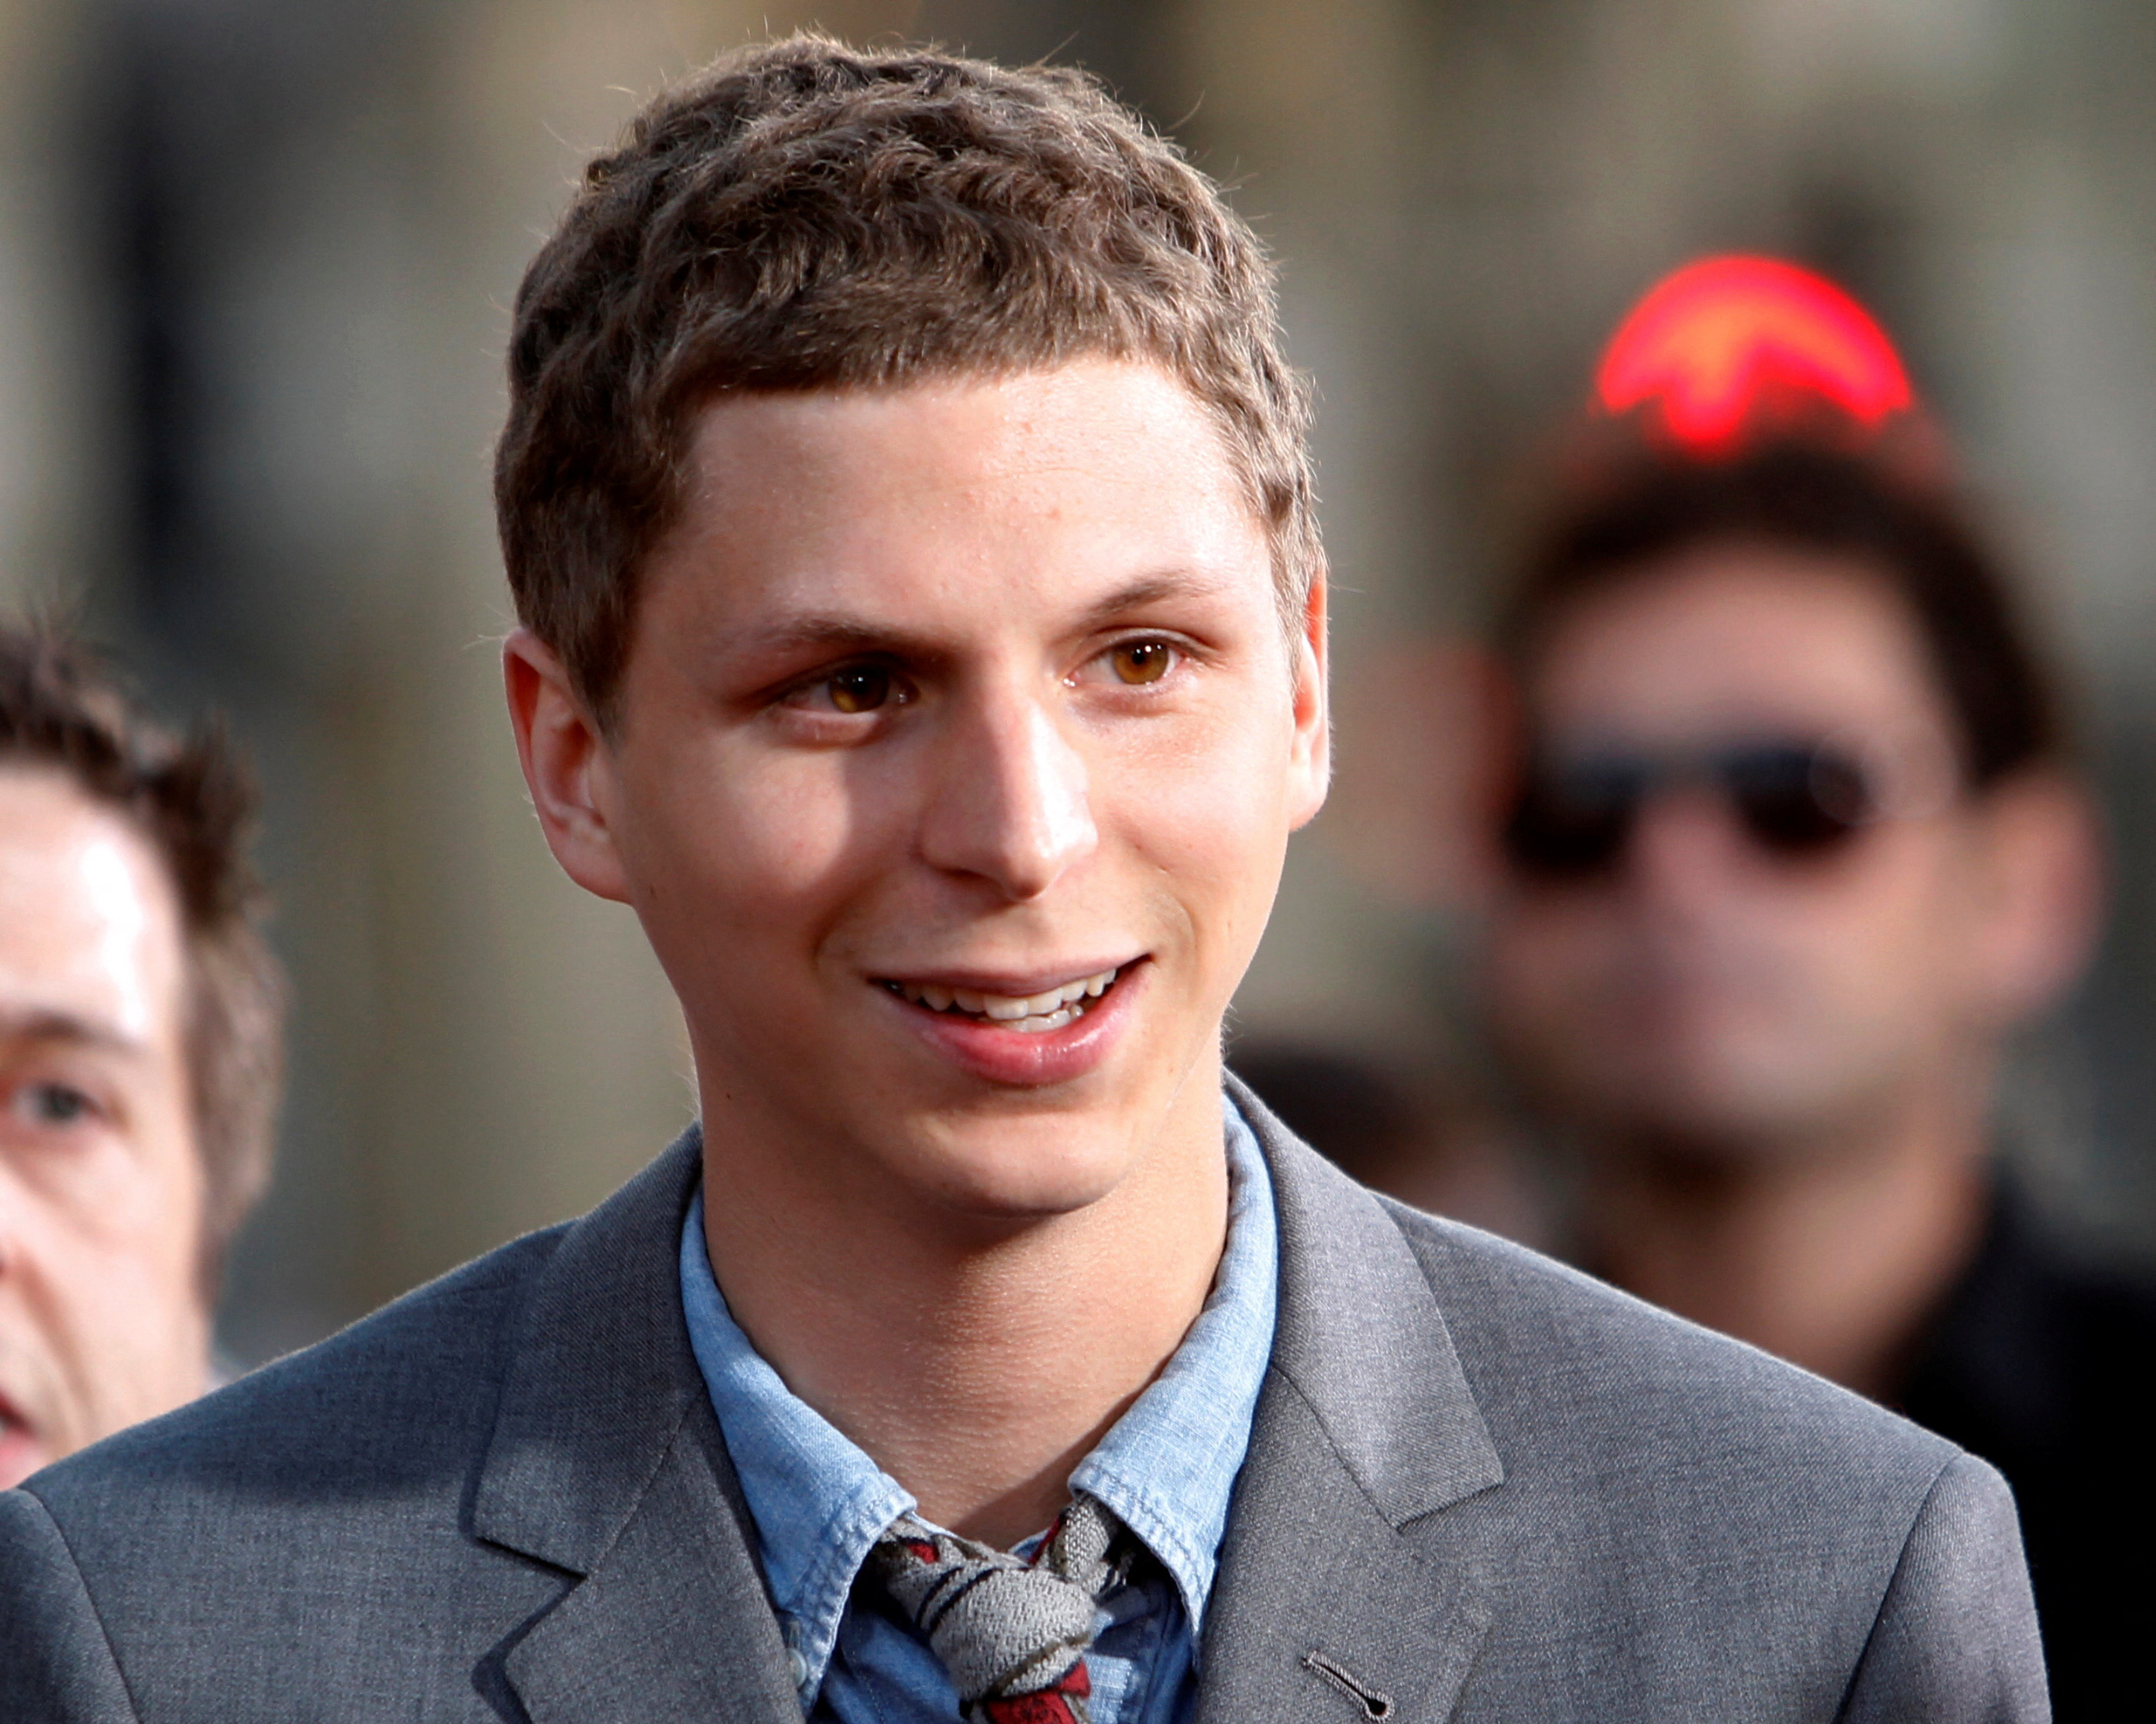 Cast member Michael Cera poses at the premiere of the movie 'Scott Pilgrim vs. the World' at the Grauman's Chinese theatre in Hollywood